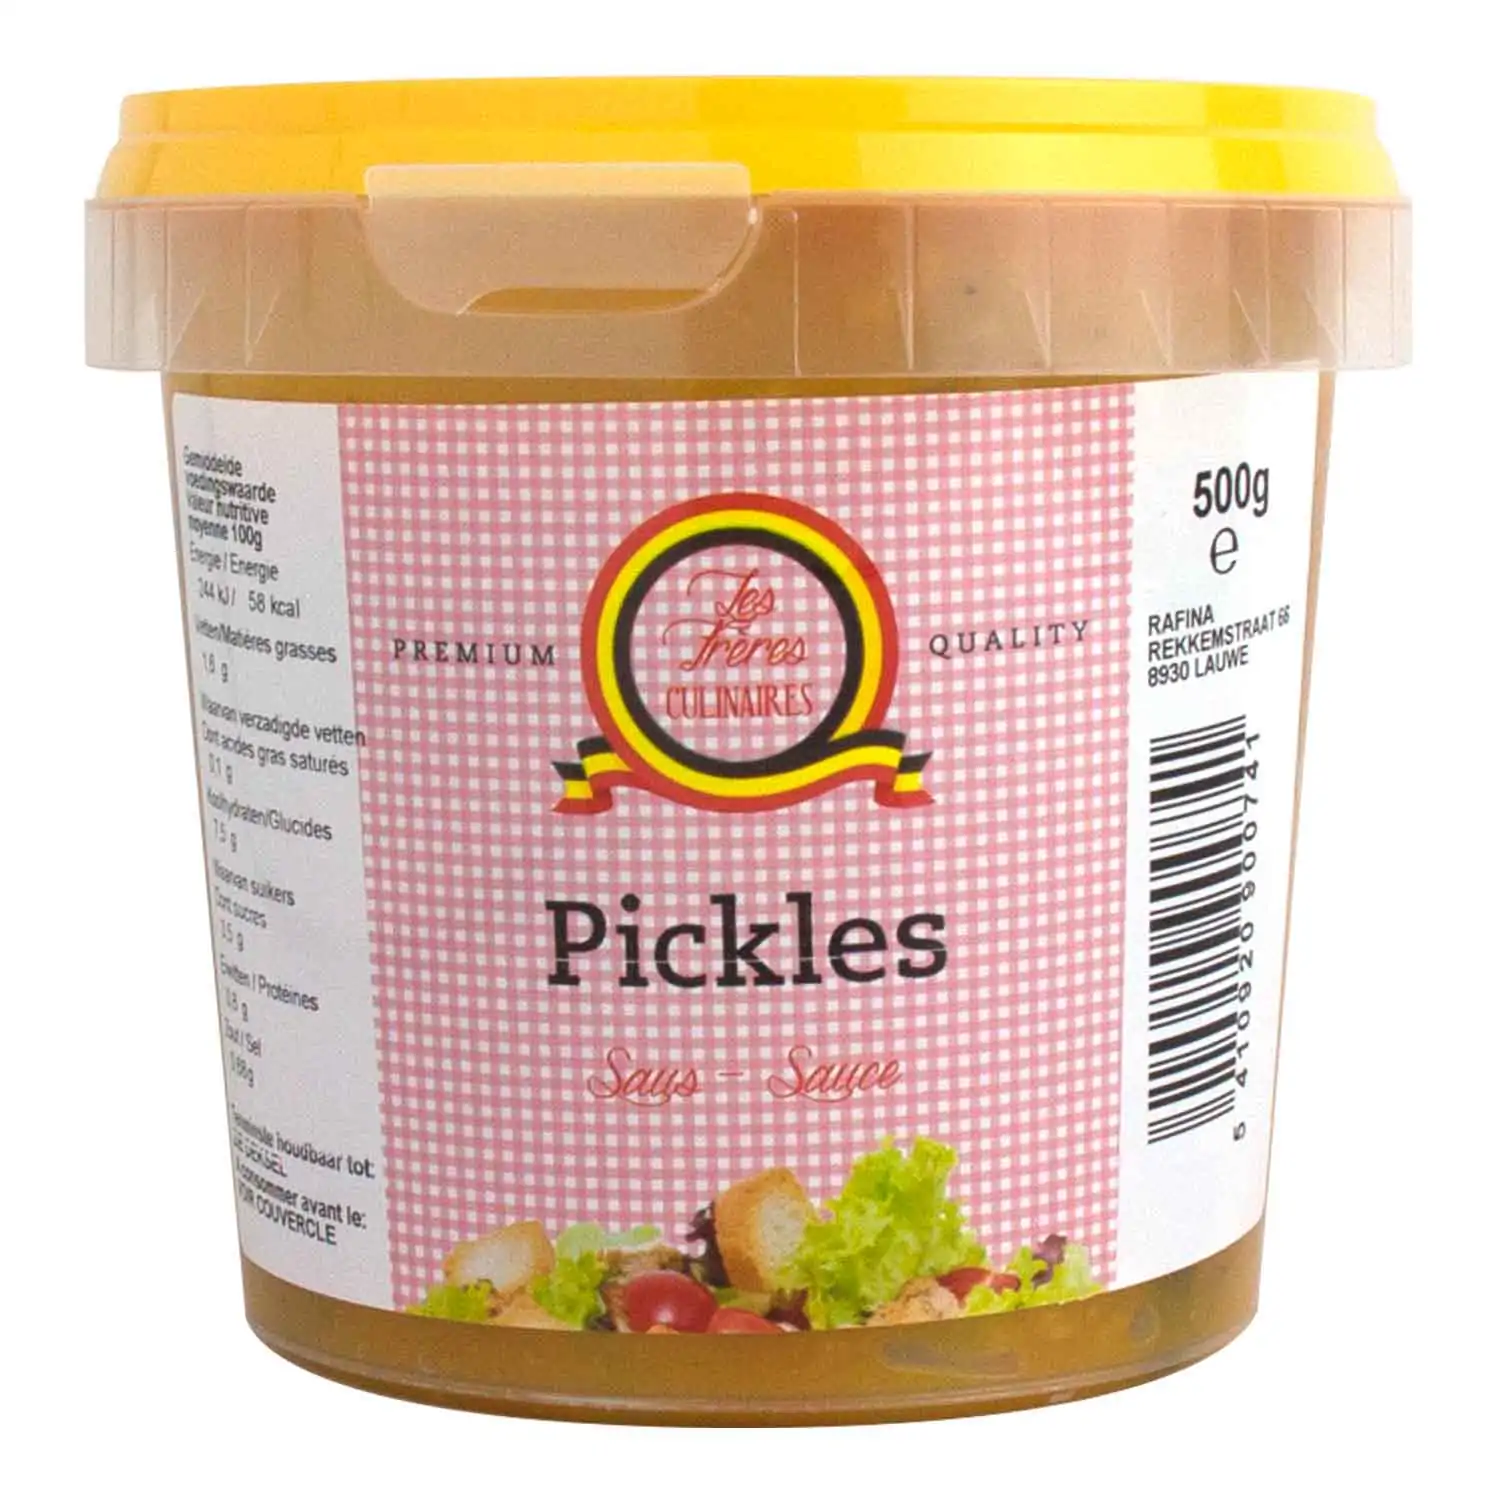 Les Frères Culinaires pickles 500g - Buy at Real Tobacco